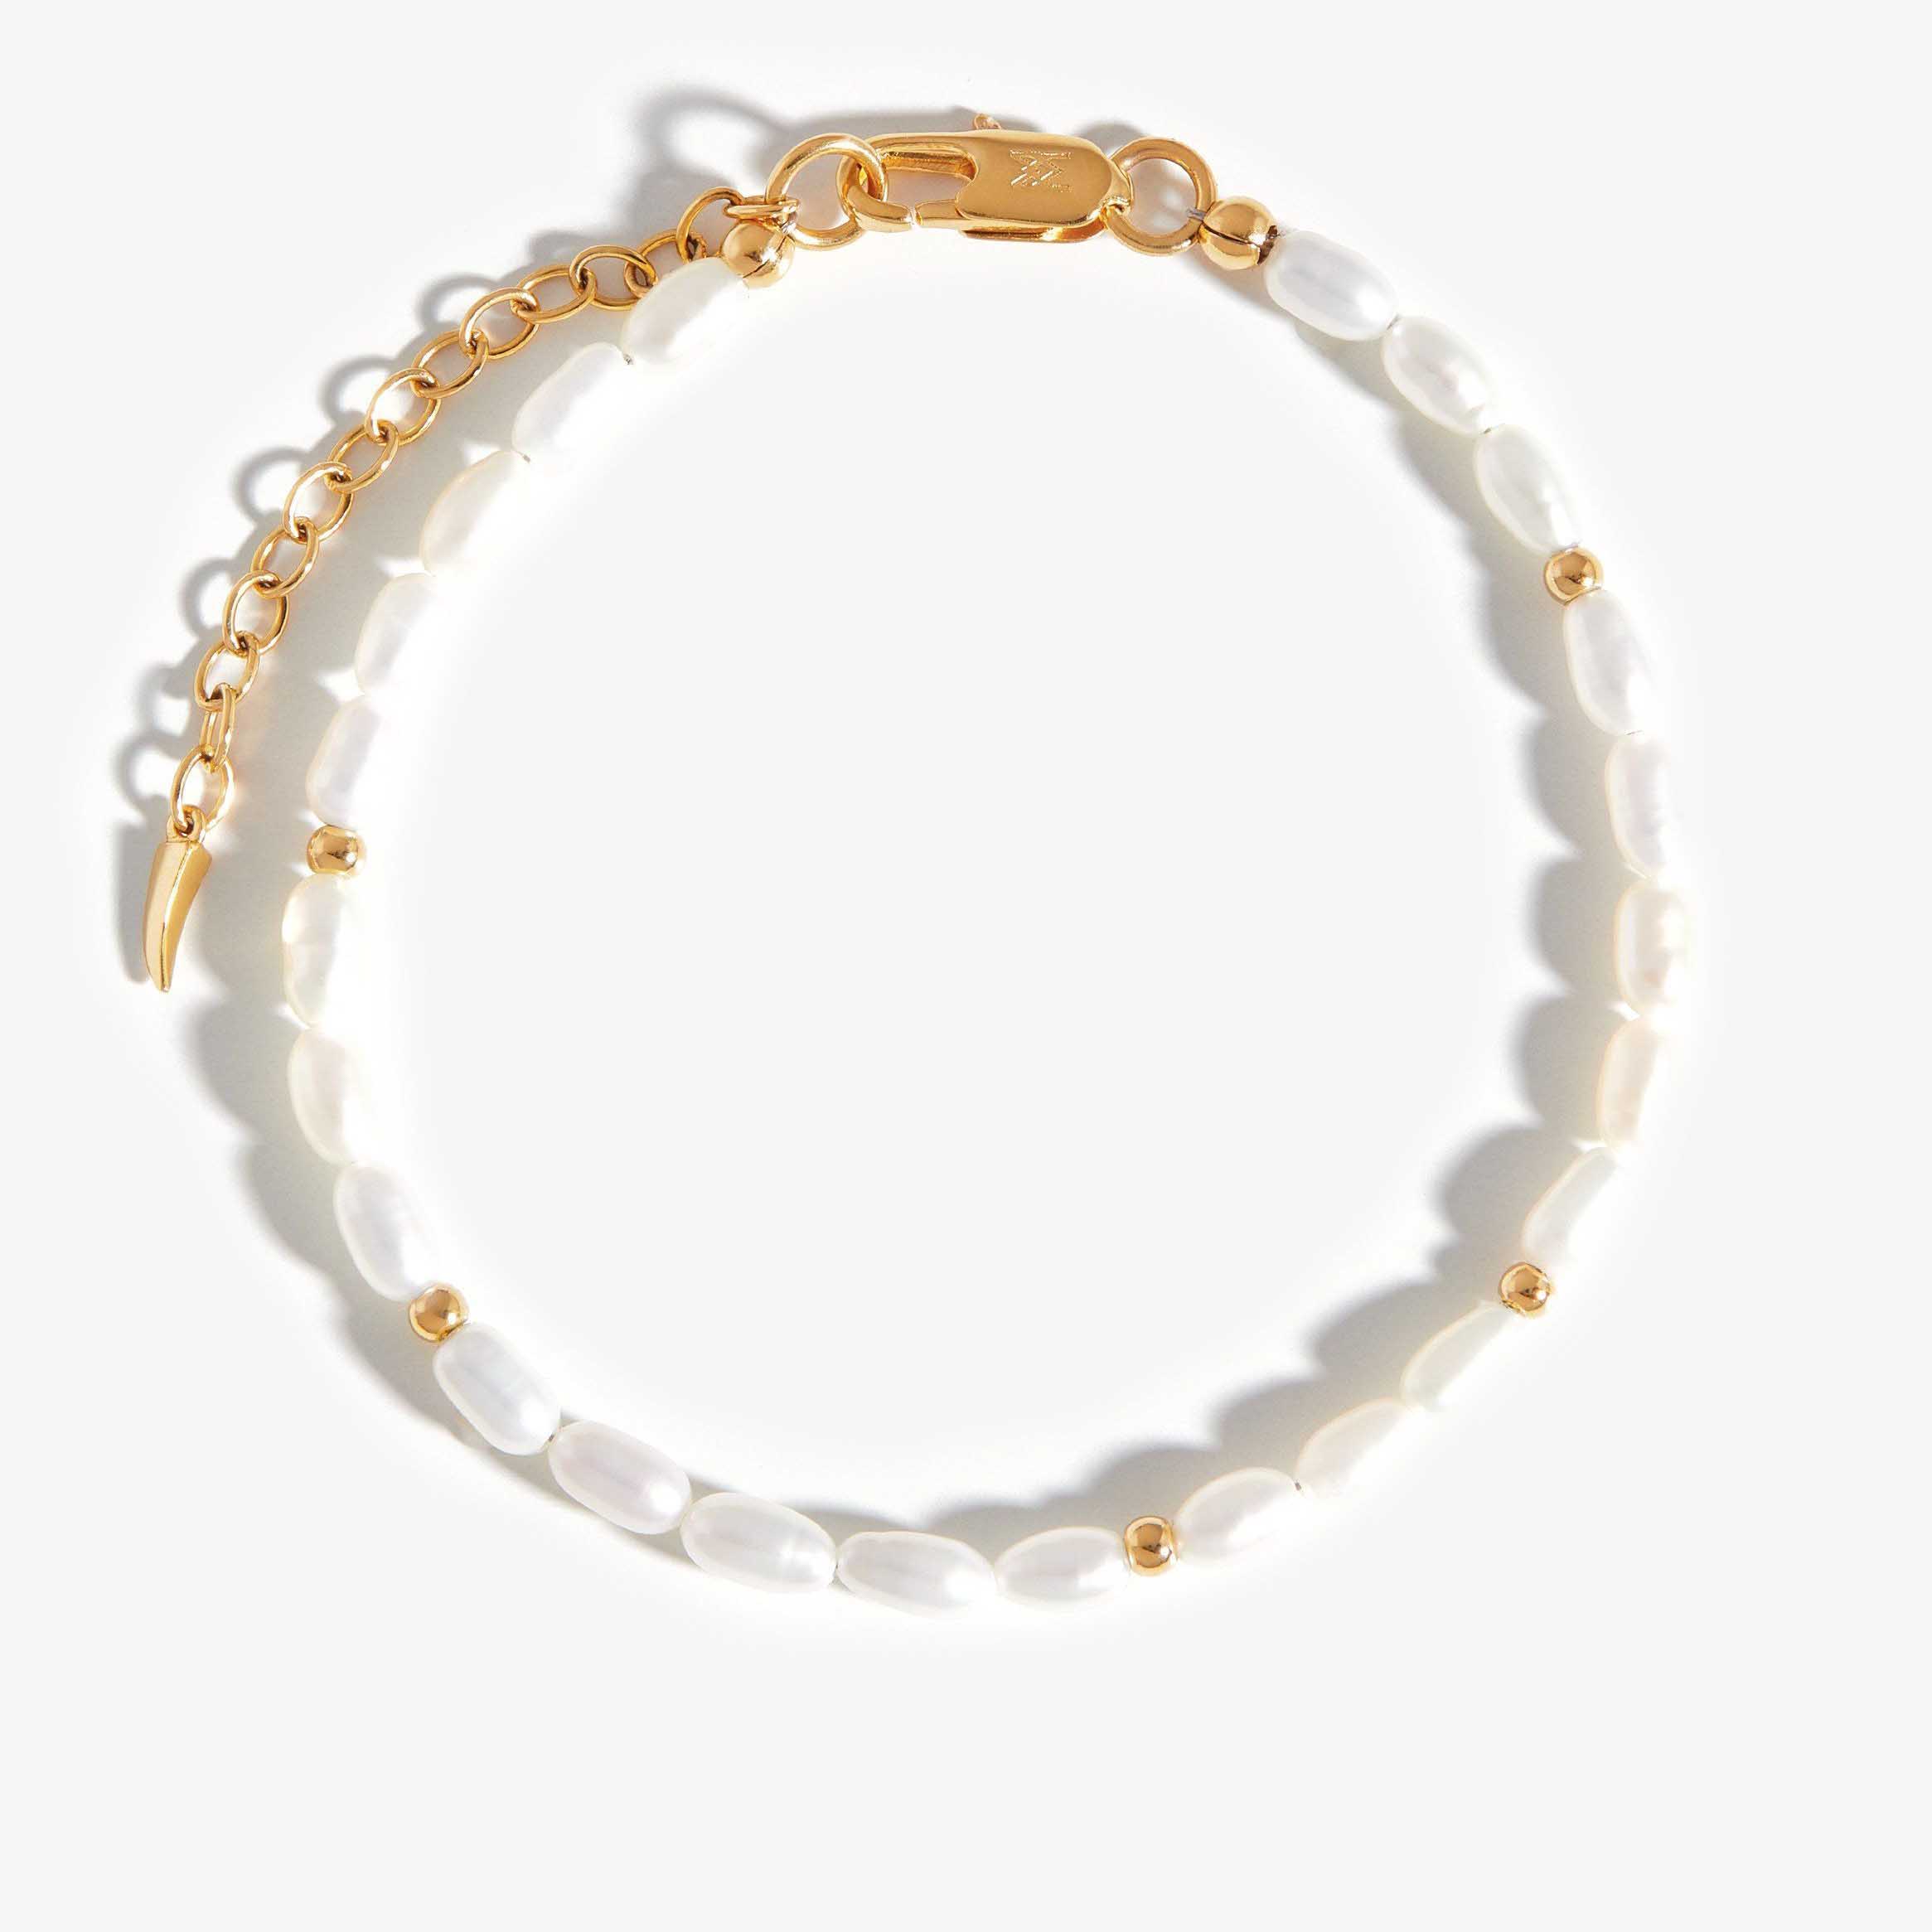 Coming China to look for pearl bracelet in 18k gold plated on sterling silver wholesalers